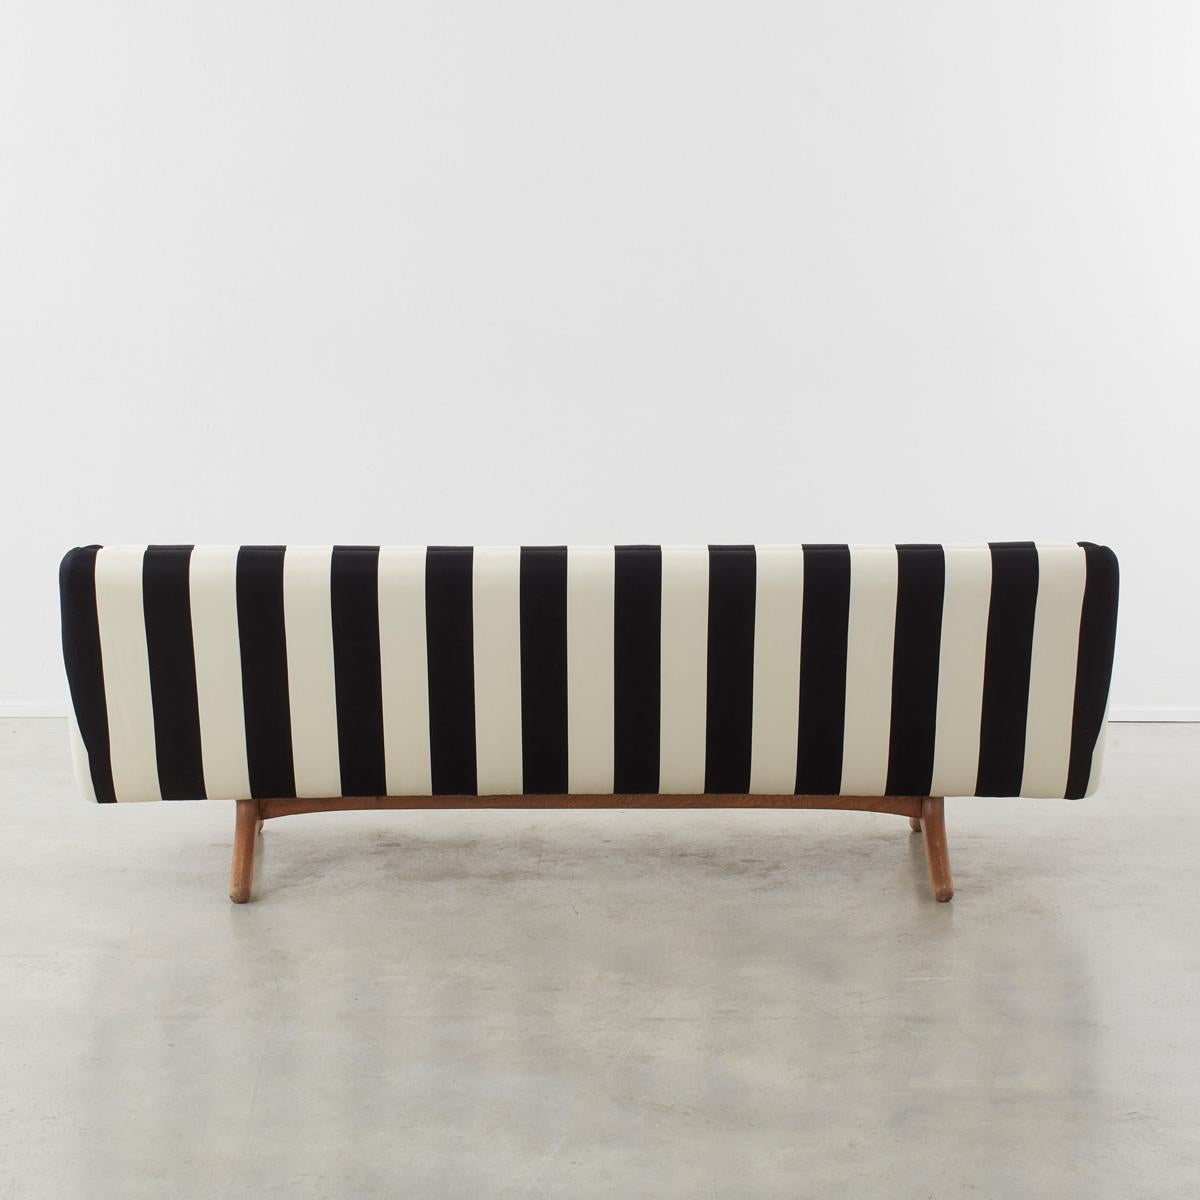 Illum Wikkelso Sofa Model Ml-90 Mikael Laursen and Son, Denmark, 1960 In Good Condition For Sale In London, GB